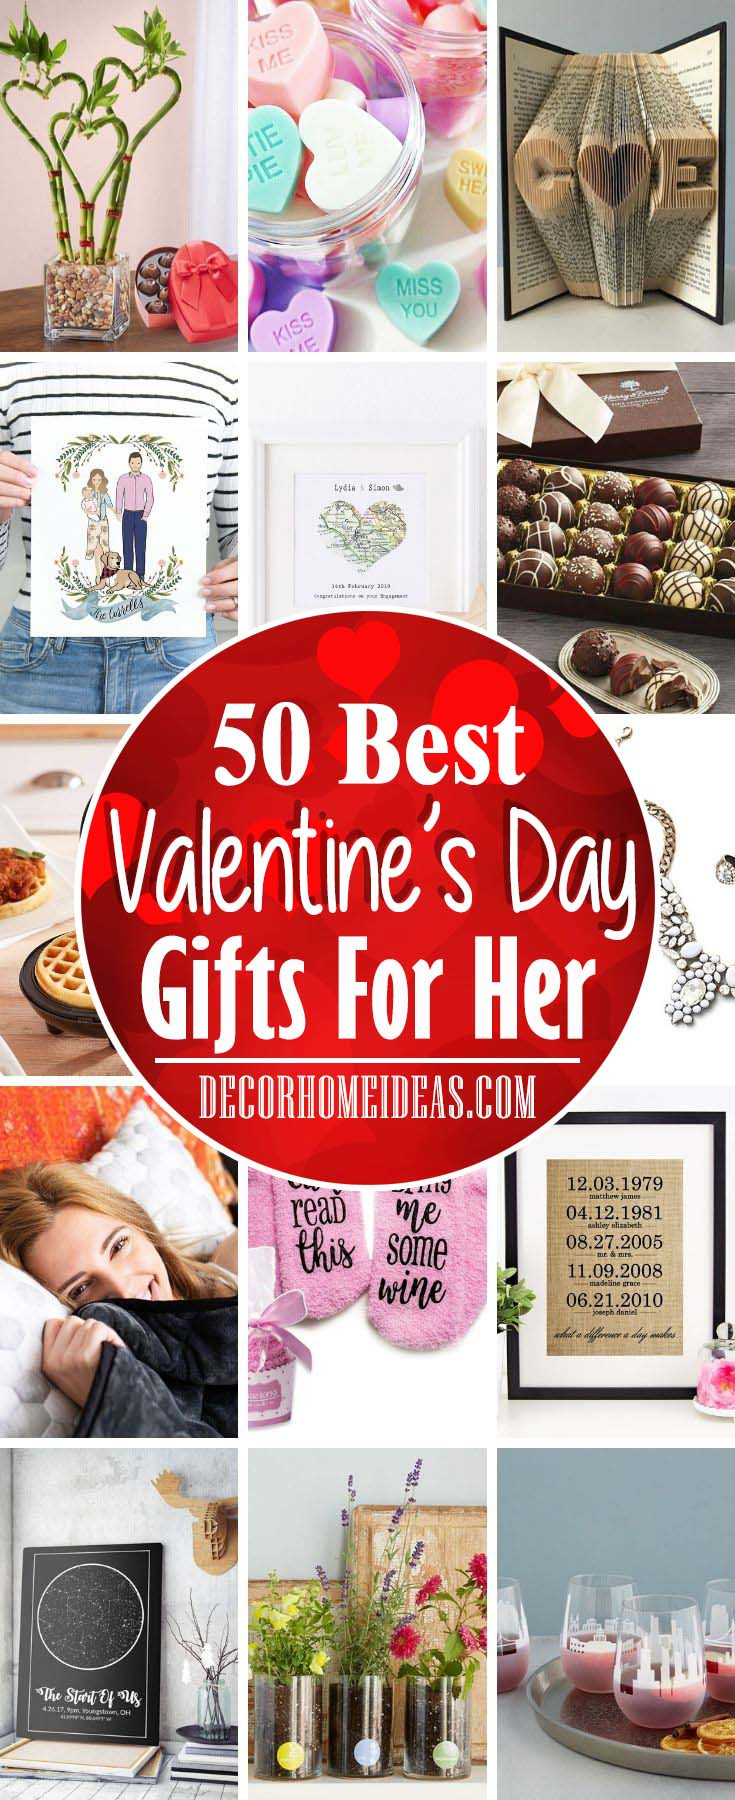 Gift Ideas For Valentines Day For Her
 50 Best Valentine s Day Gifts For Her 2020 Update